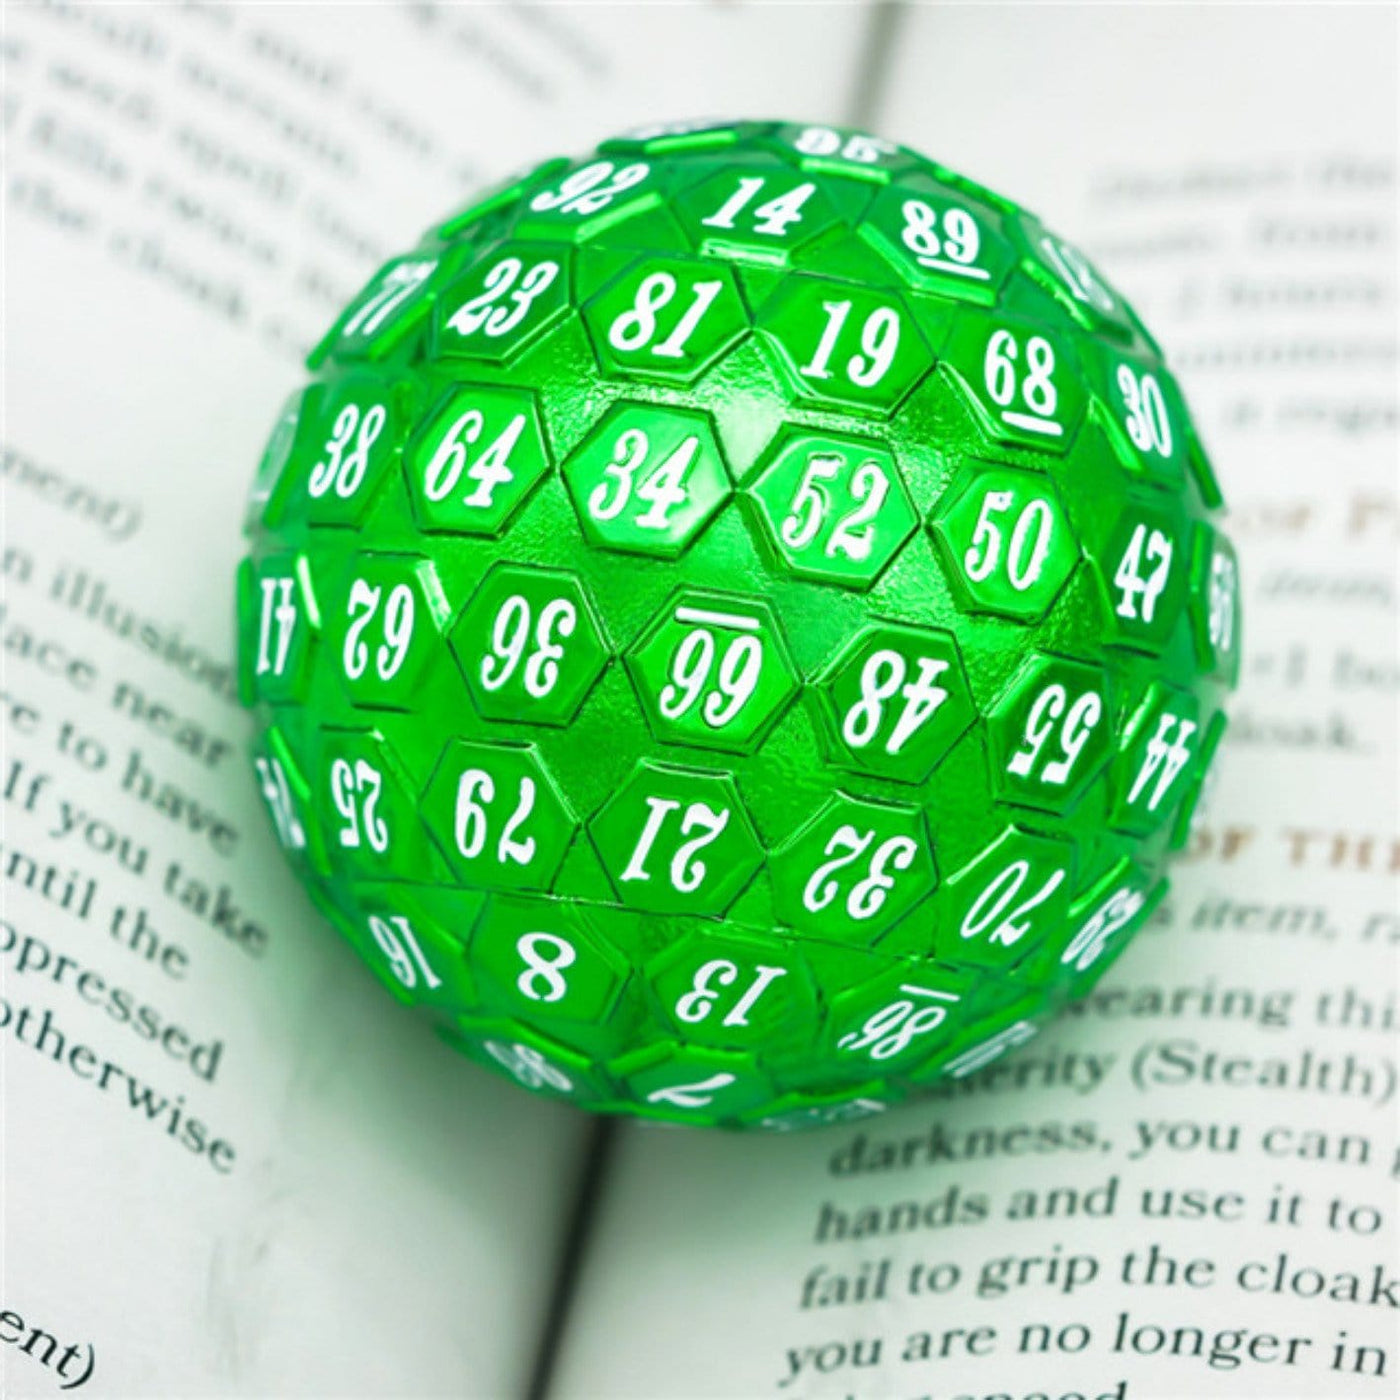 45mm Metal D100 - Green with White Font Metal Dice Foam Brain Games